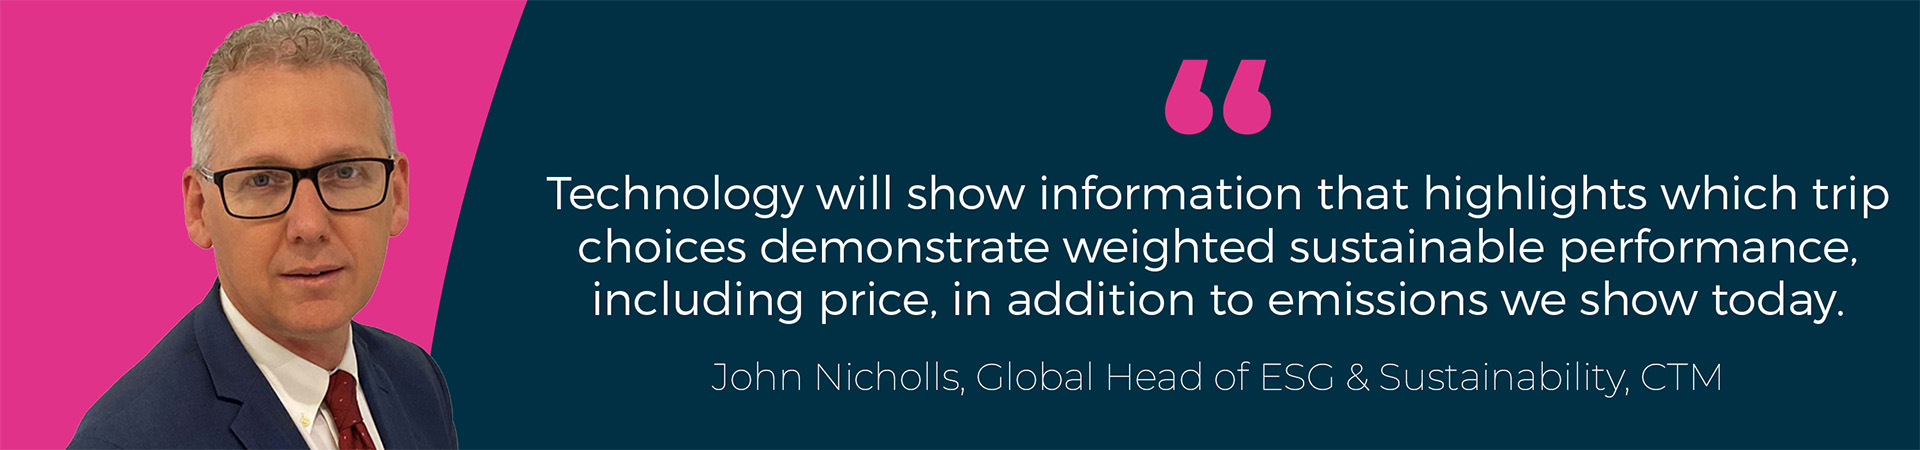 Banner - "Technology will show information that highlights which trip choices demonstrate weighted sustainable performance, including price, in addition to emissions we show today"